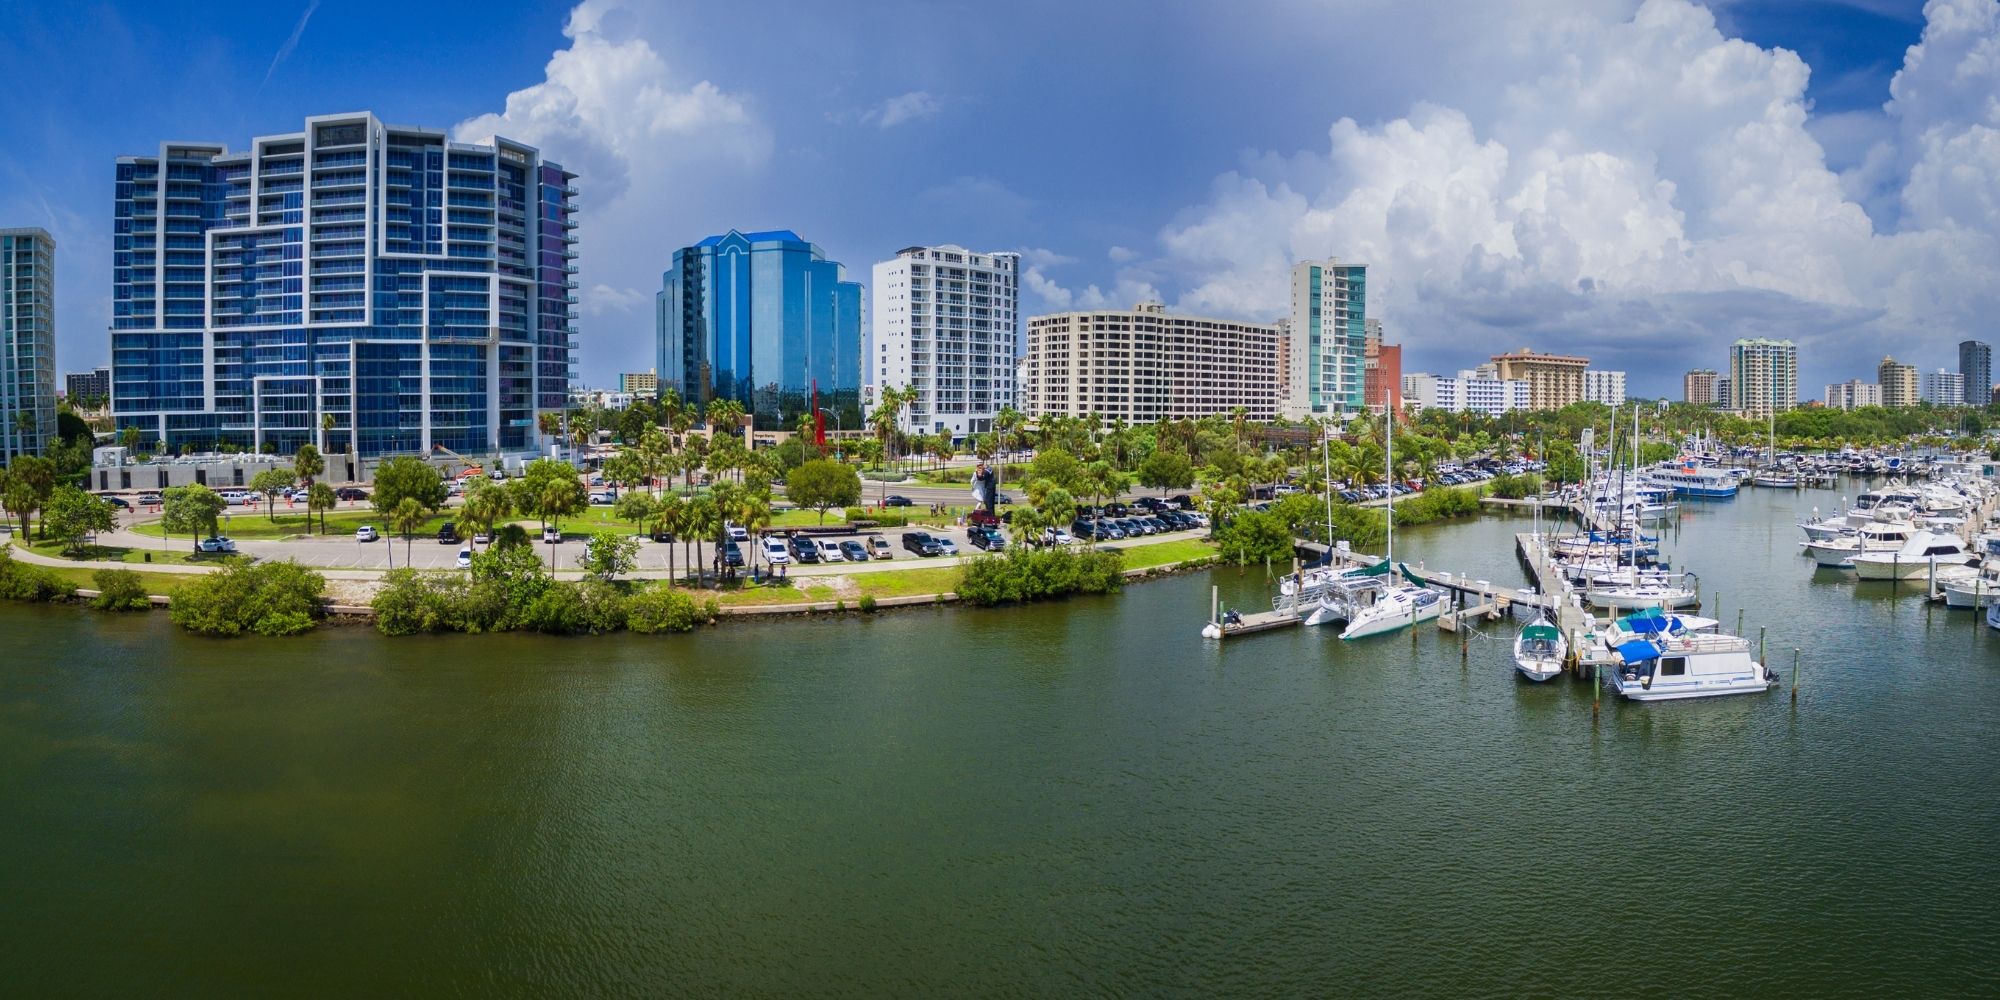 Top 5 Reasons Sarasota Is The #1 City To Relocate To